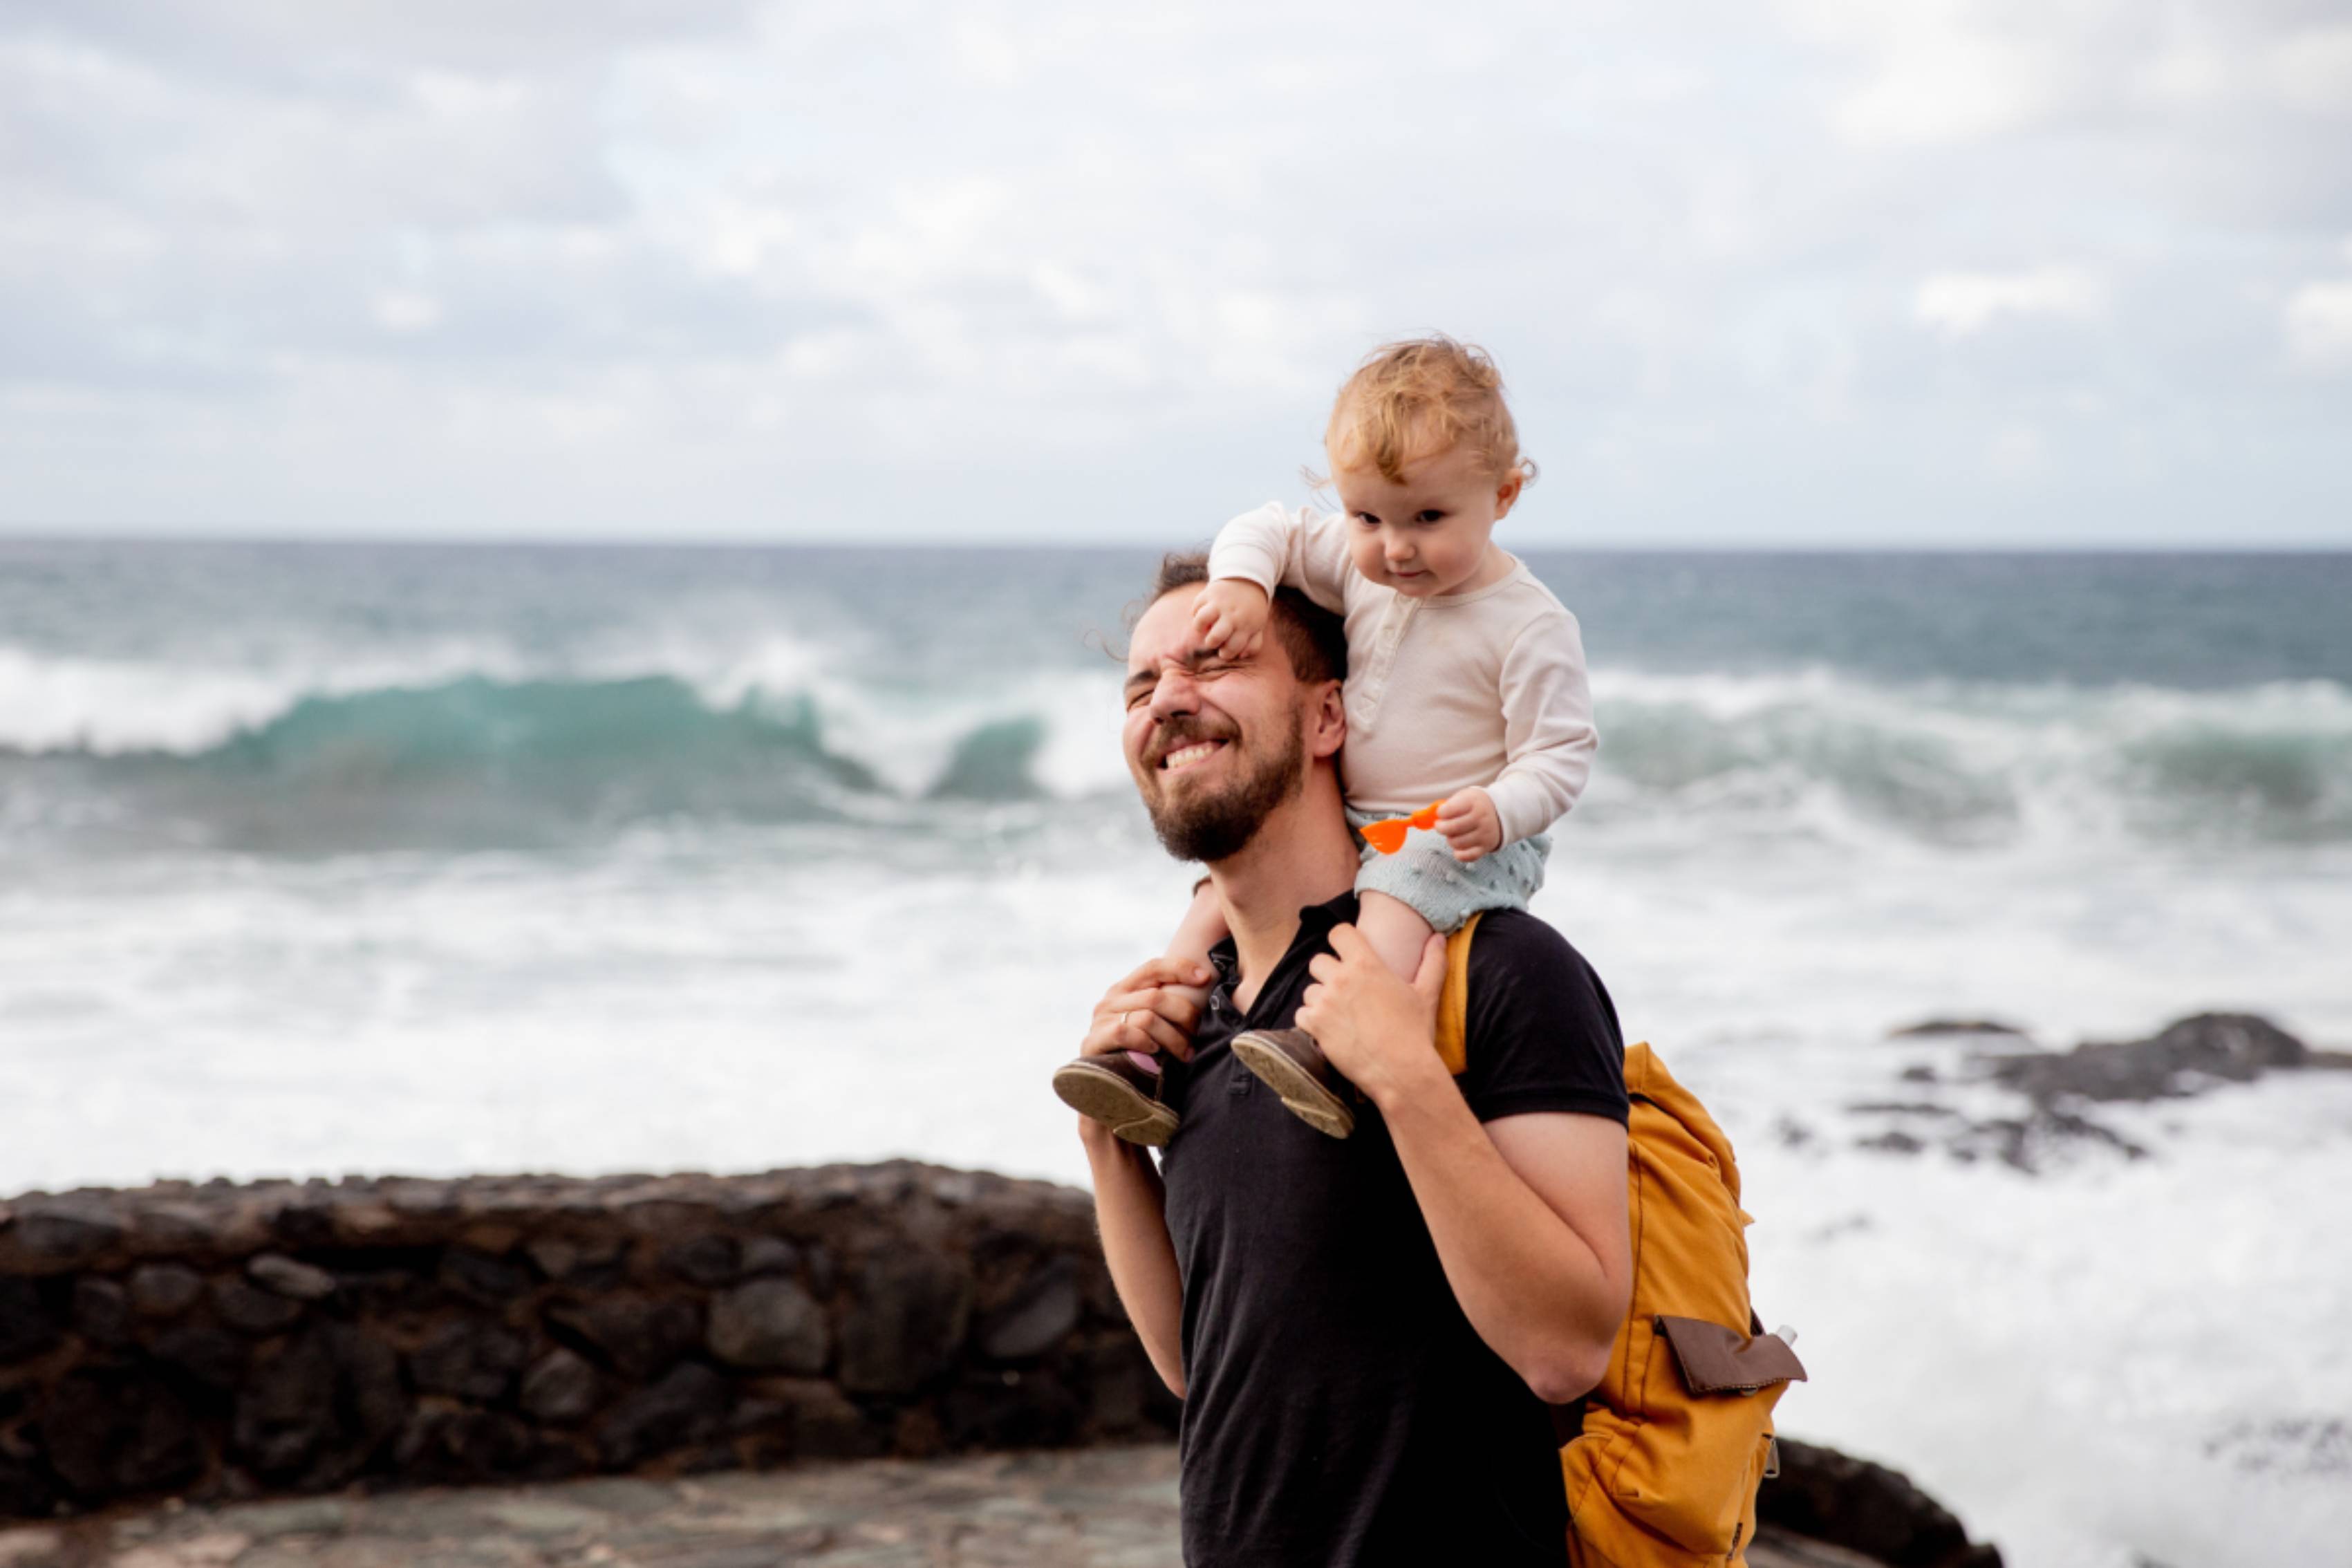  The Pros and Cons of Traveling with Kids and How to Make It Enjoyable